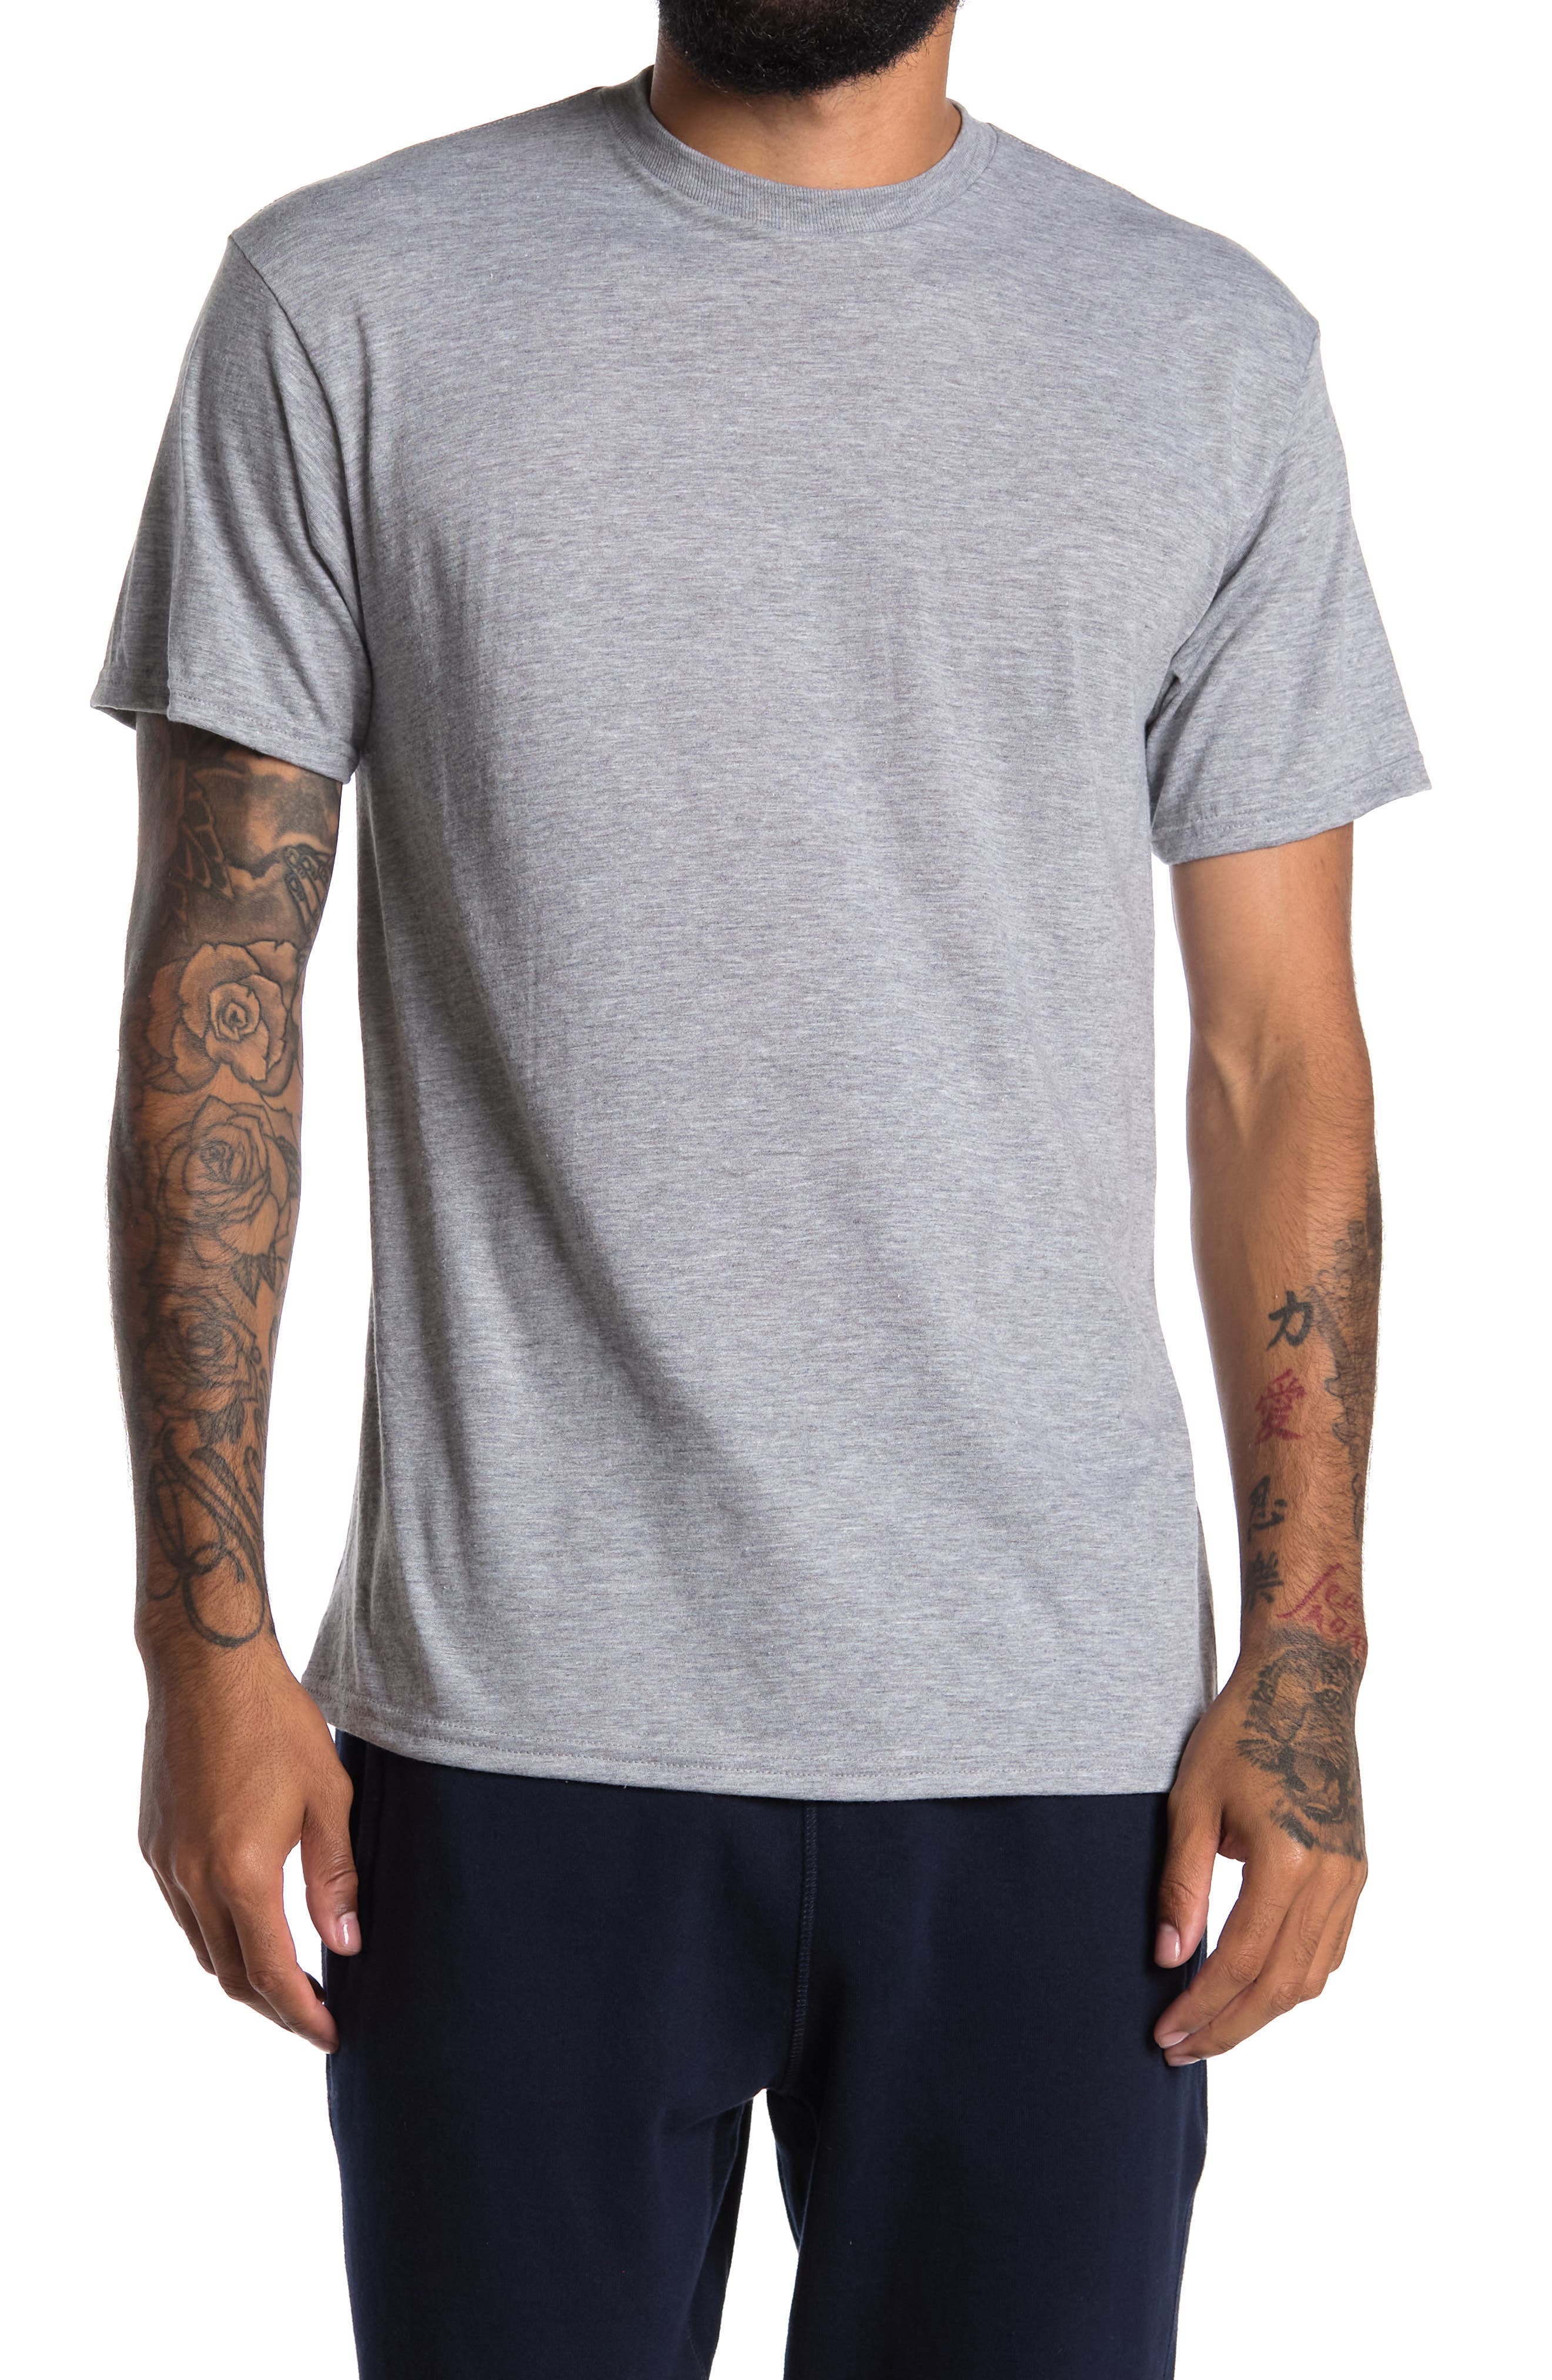 Jeff Prospect Performance T-shirt In Athletic Heather